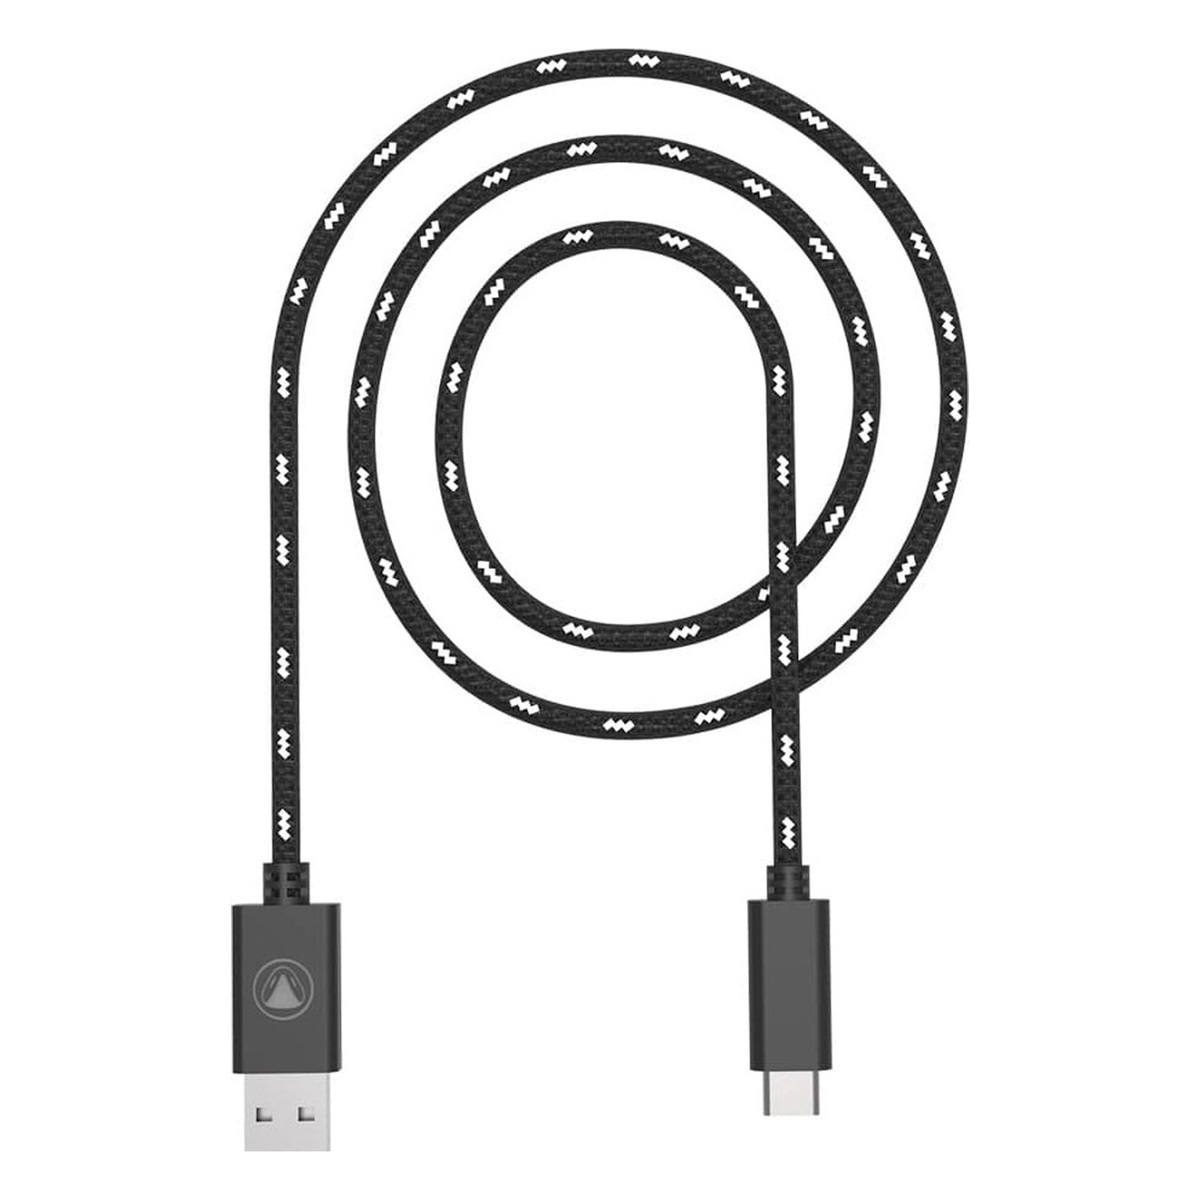 Snakebyte PS5 Charging Cable, 3 m, SB916106